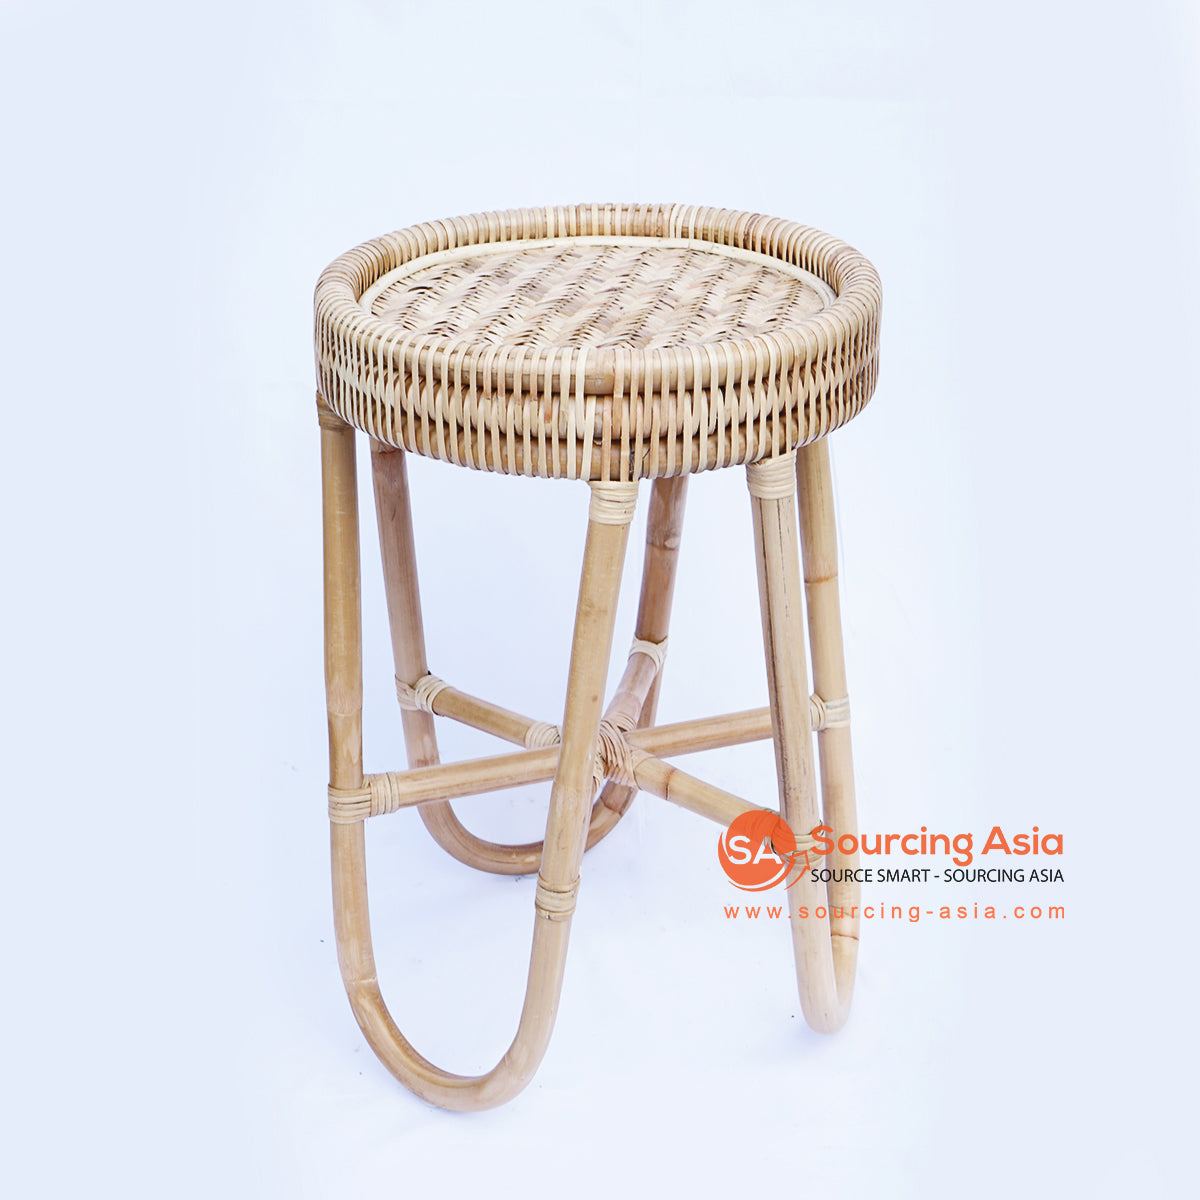 BNTC004-3 NATURAL RATTAN SIDE TABLE